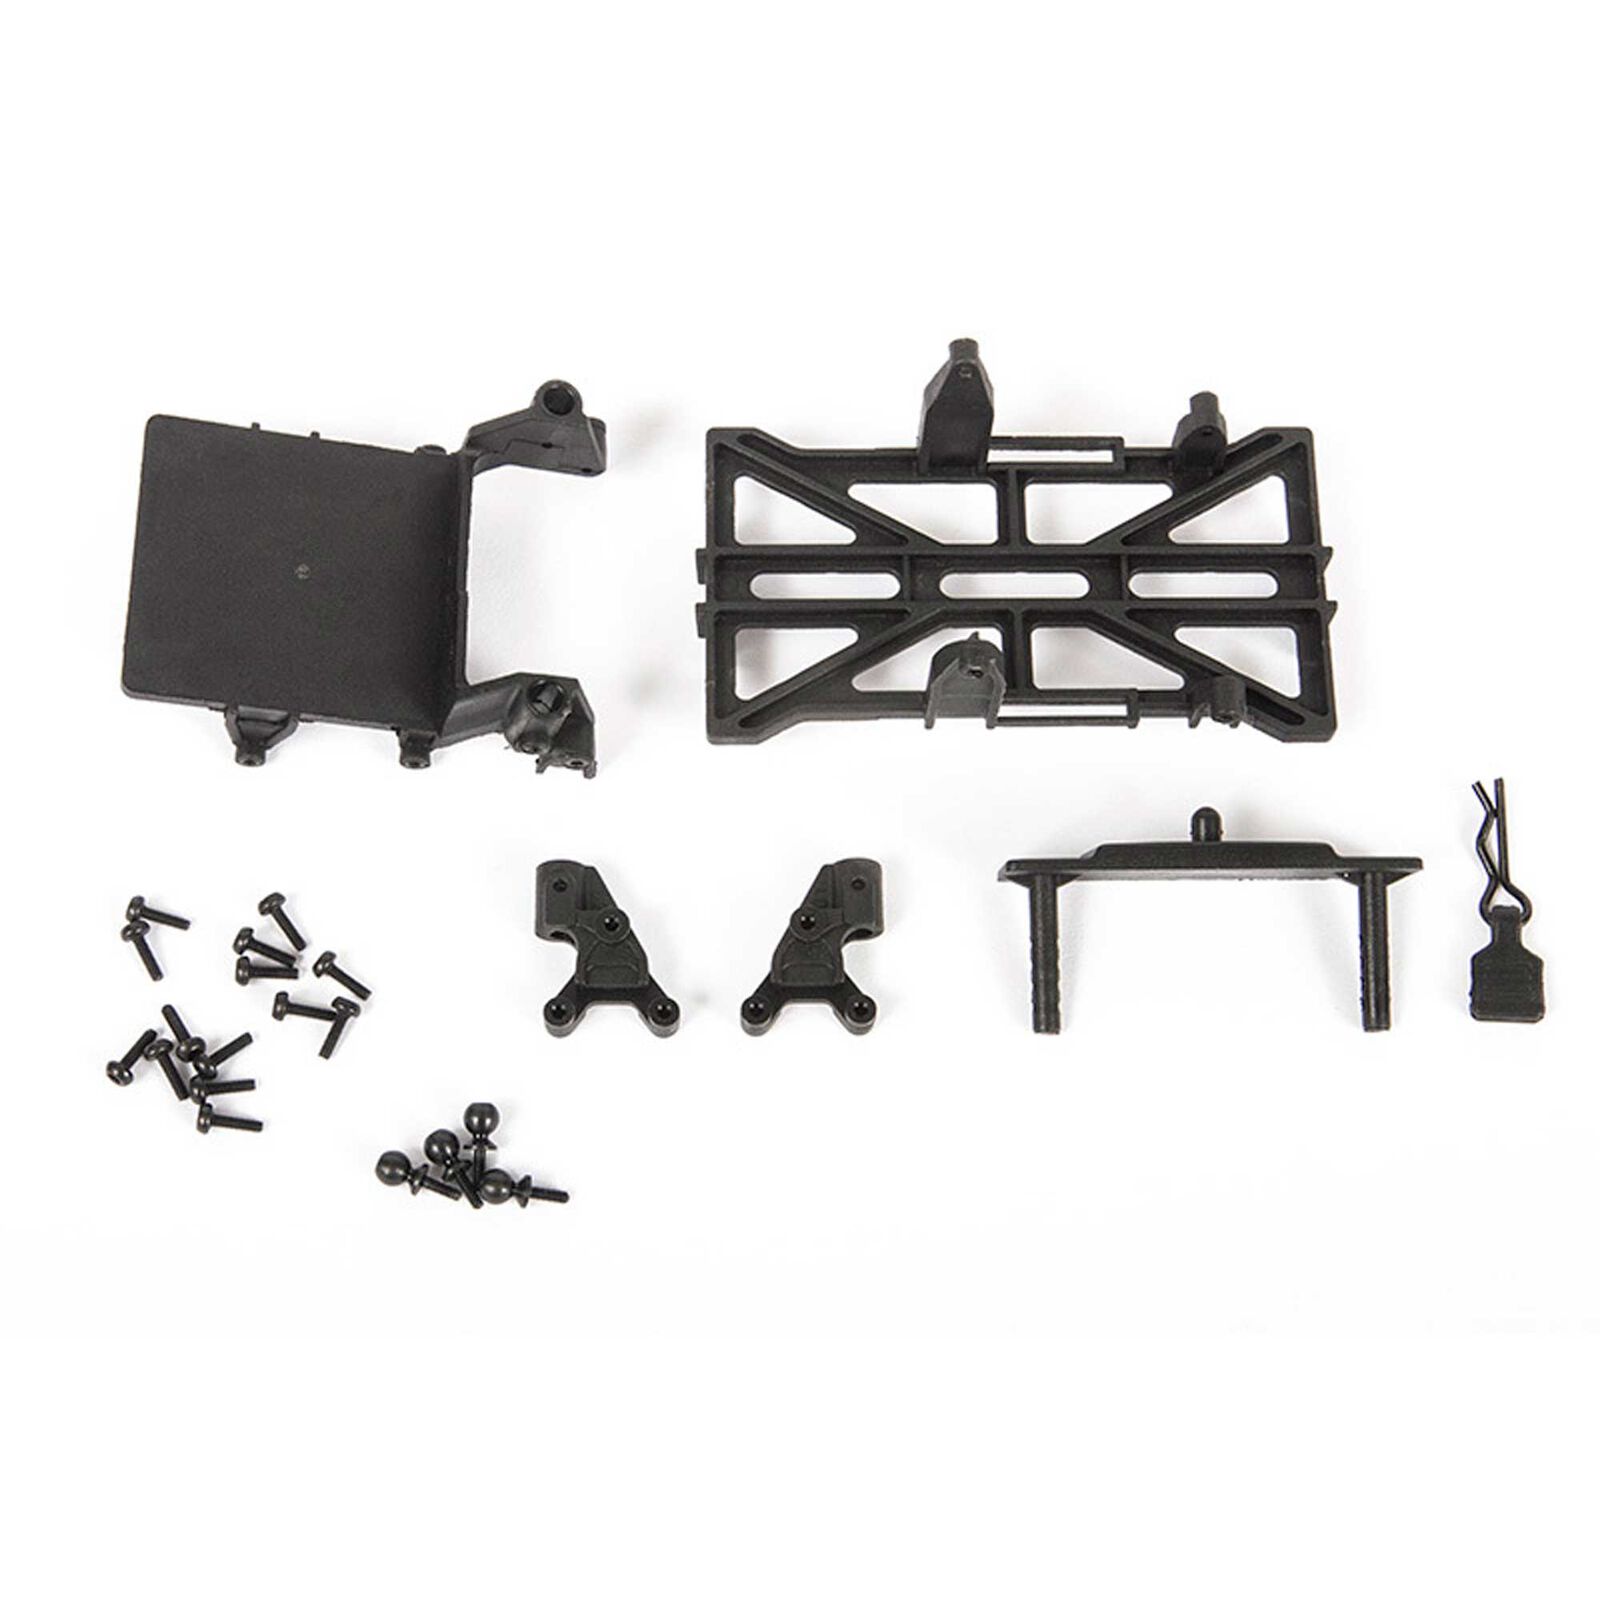 AXIAL Chassis Parts, Long Wheel Base 133.7mm: SCX24